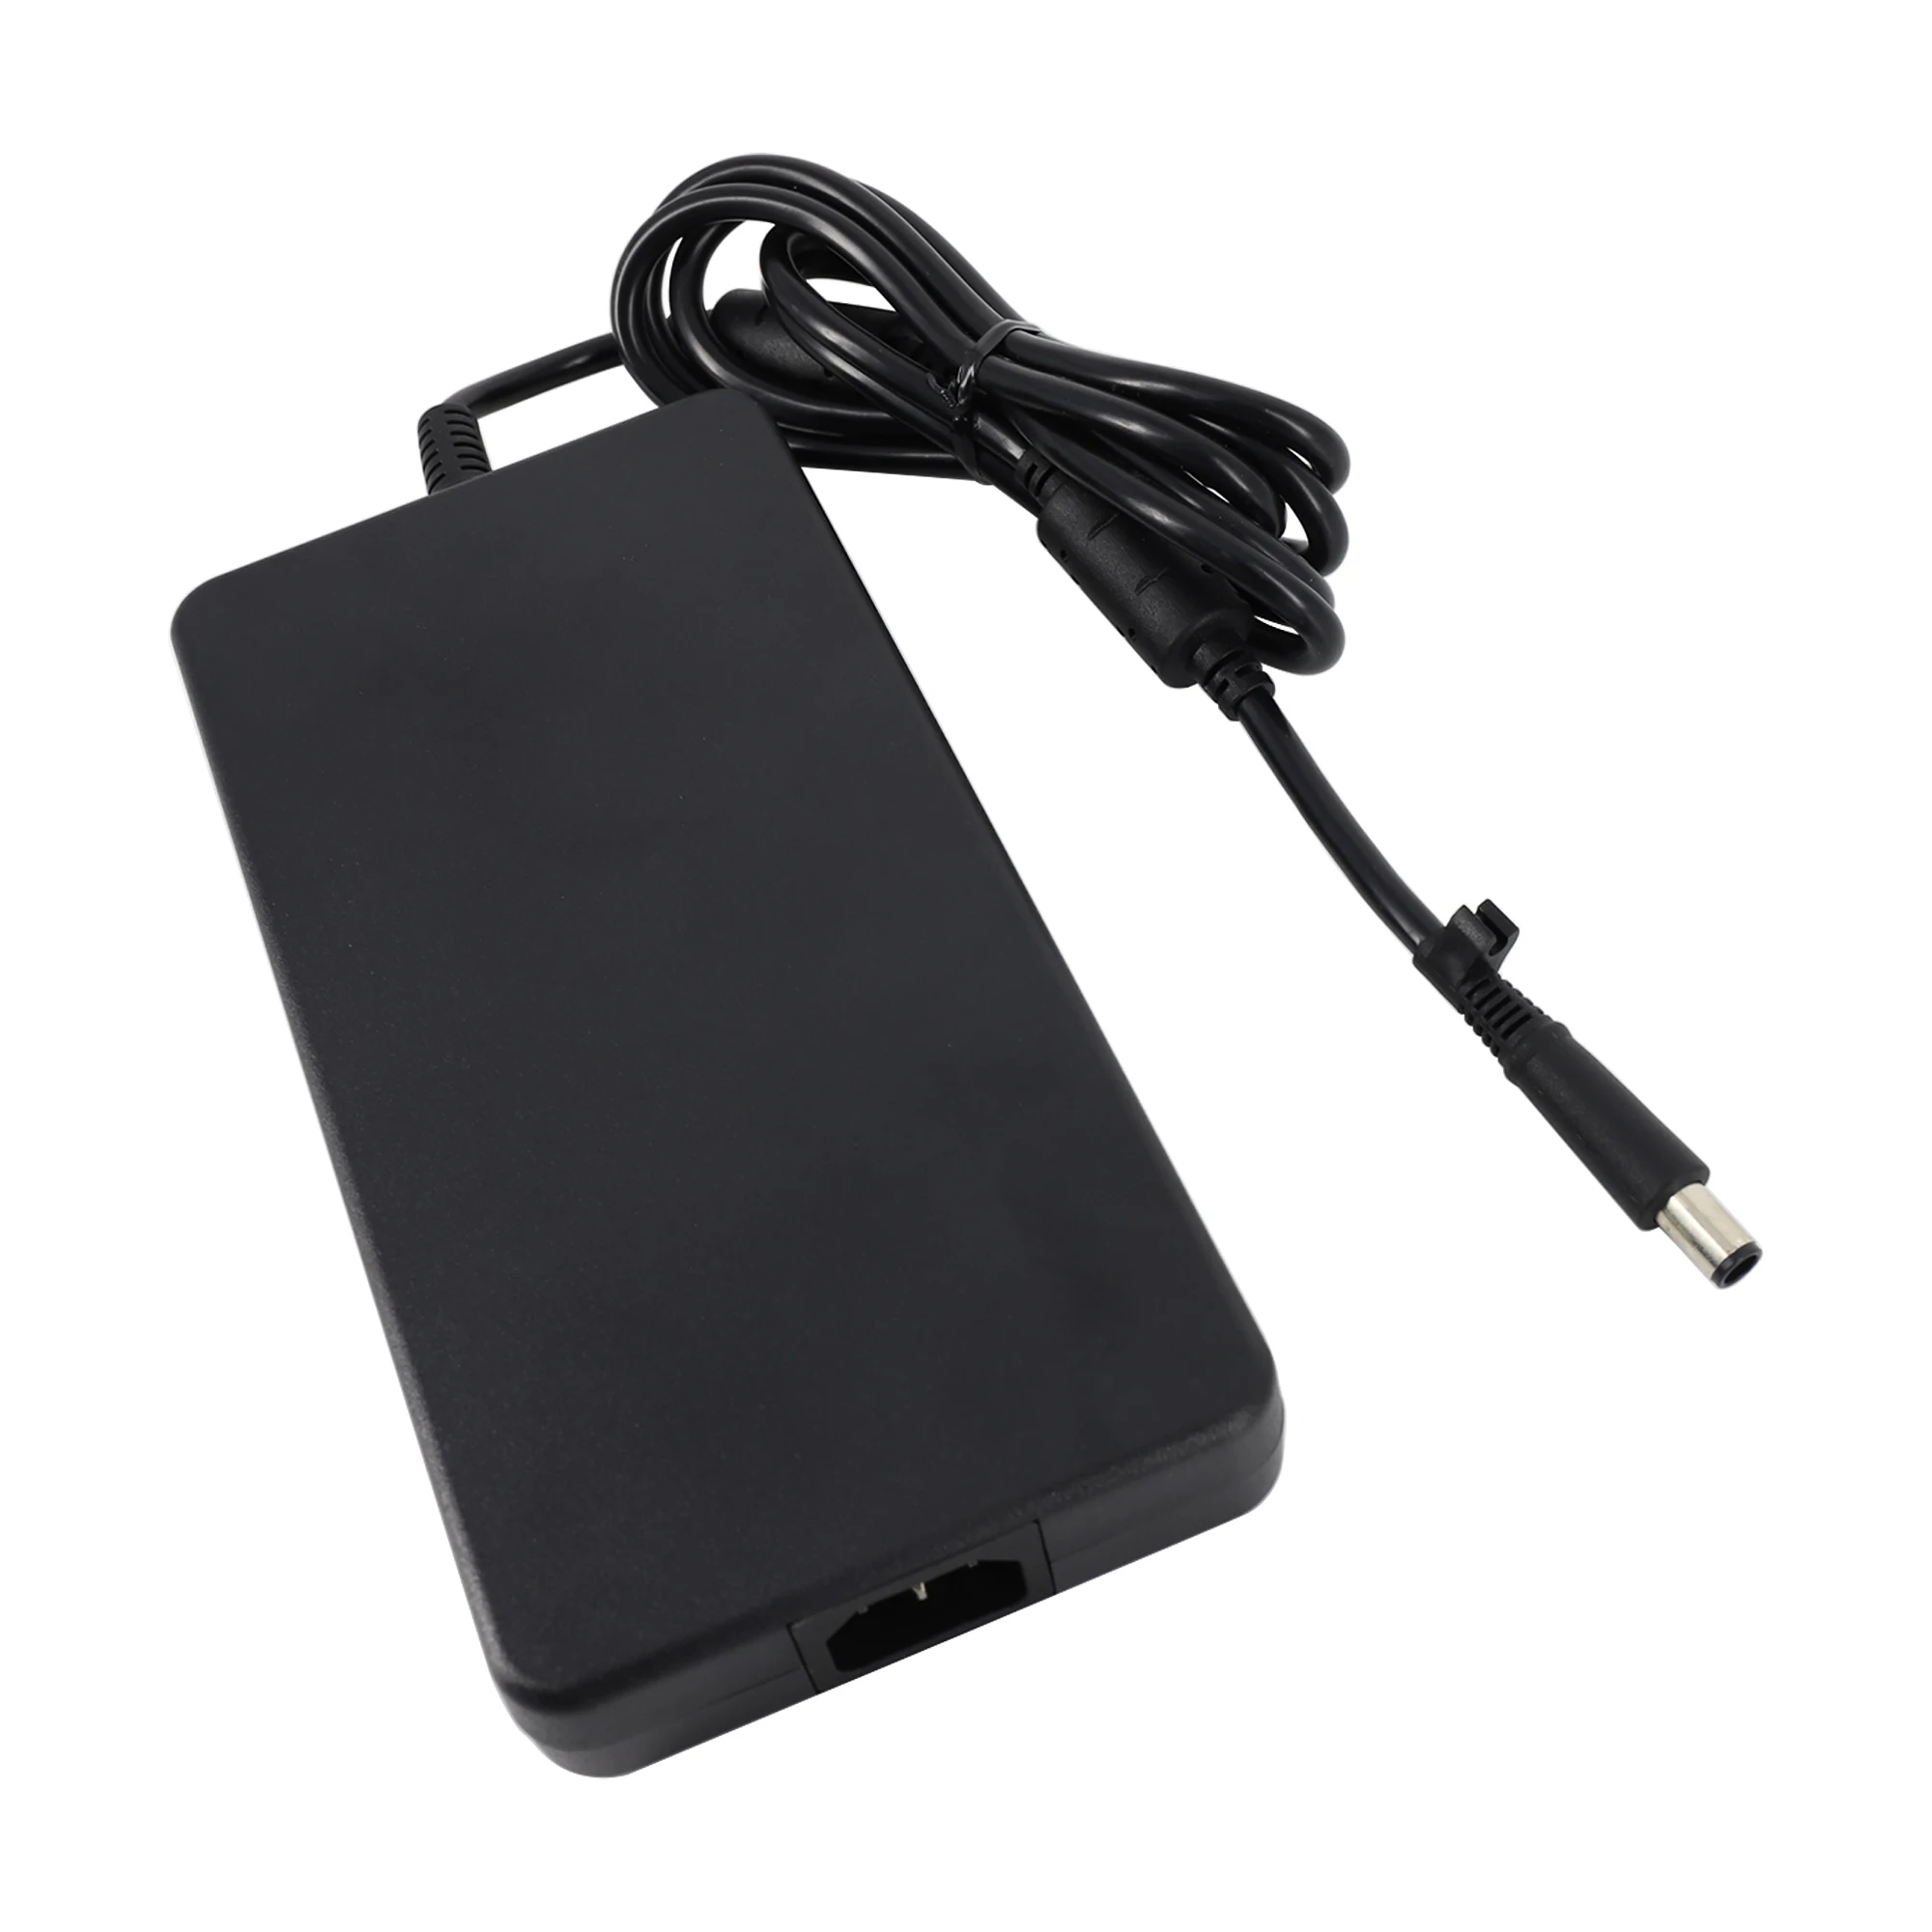 Genuine 19.5V 11.8A 230W ac power adapter ADP-230EB T ADP-230CB B for MSI GT72 WT72 MS-1781GT80 MS-1812 enlarge